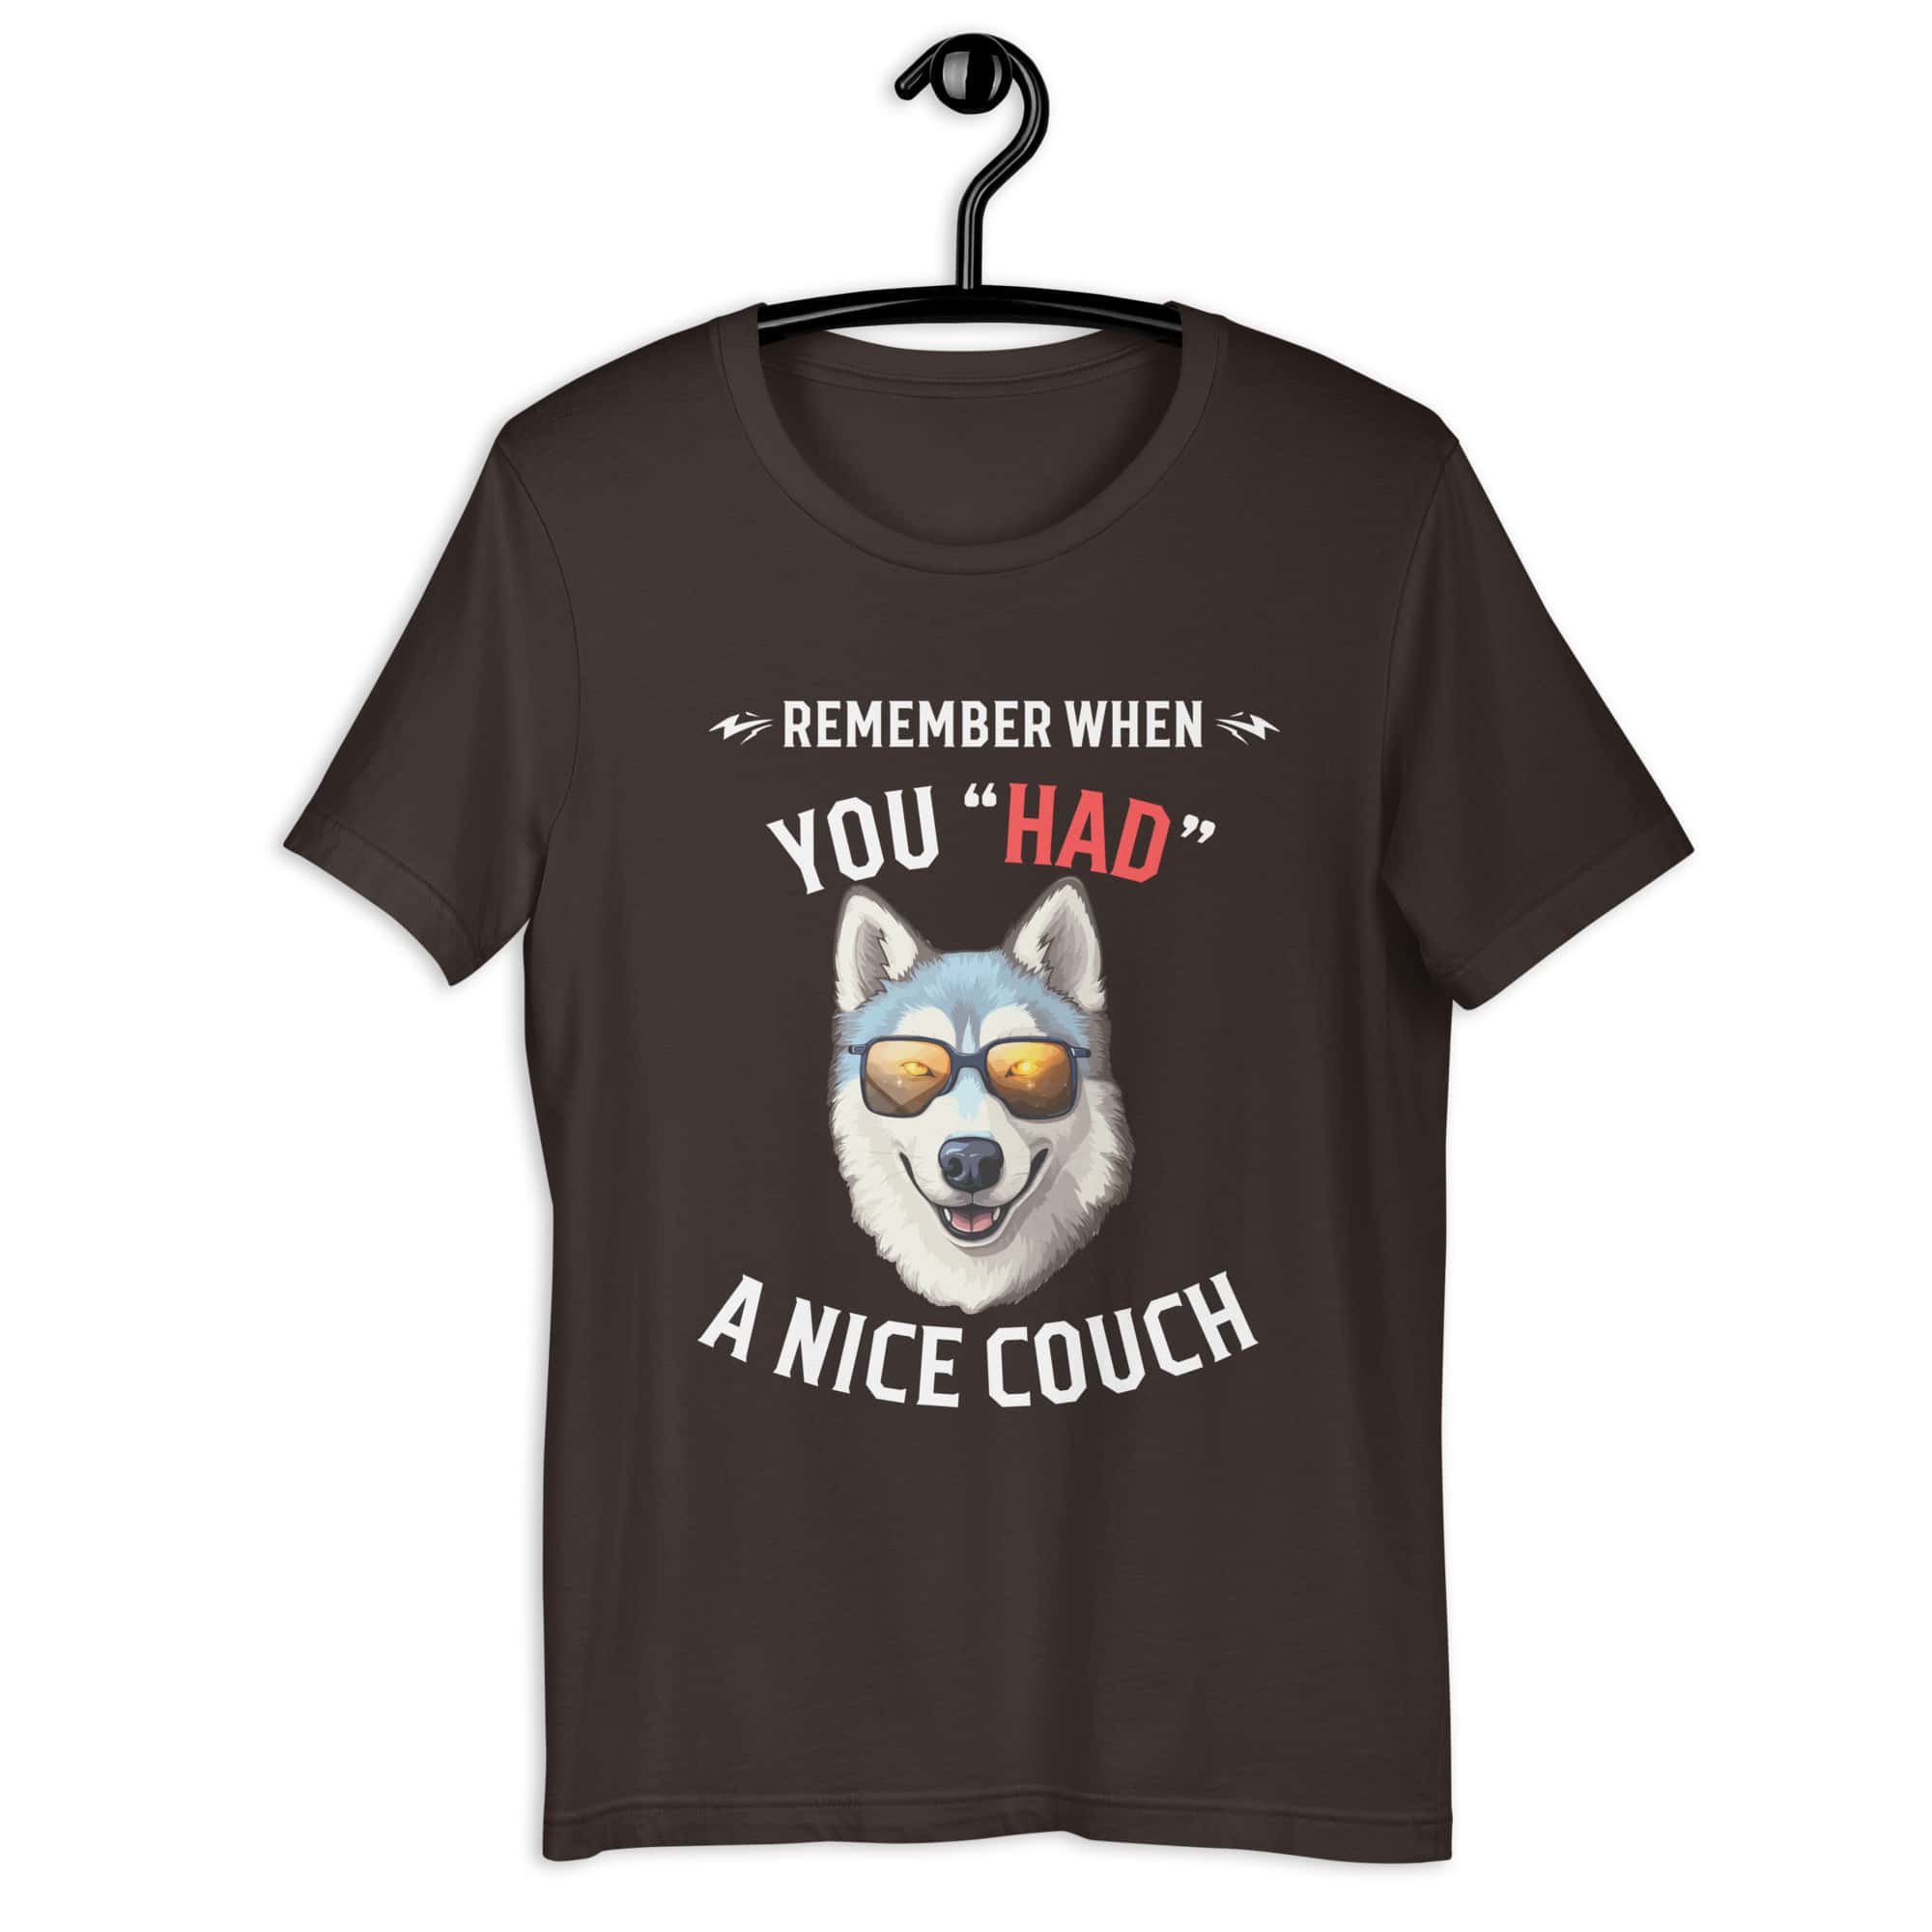 "Remember When You Had A Nice Couch" Husky Unisex T-Shirt brown